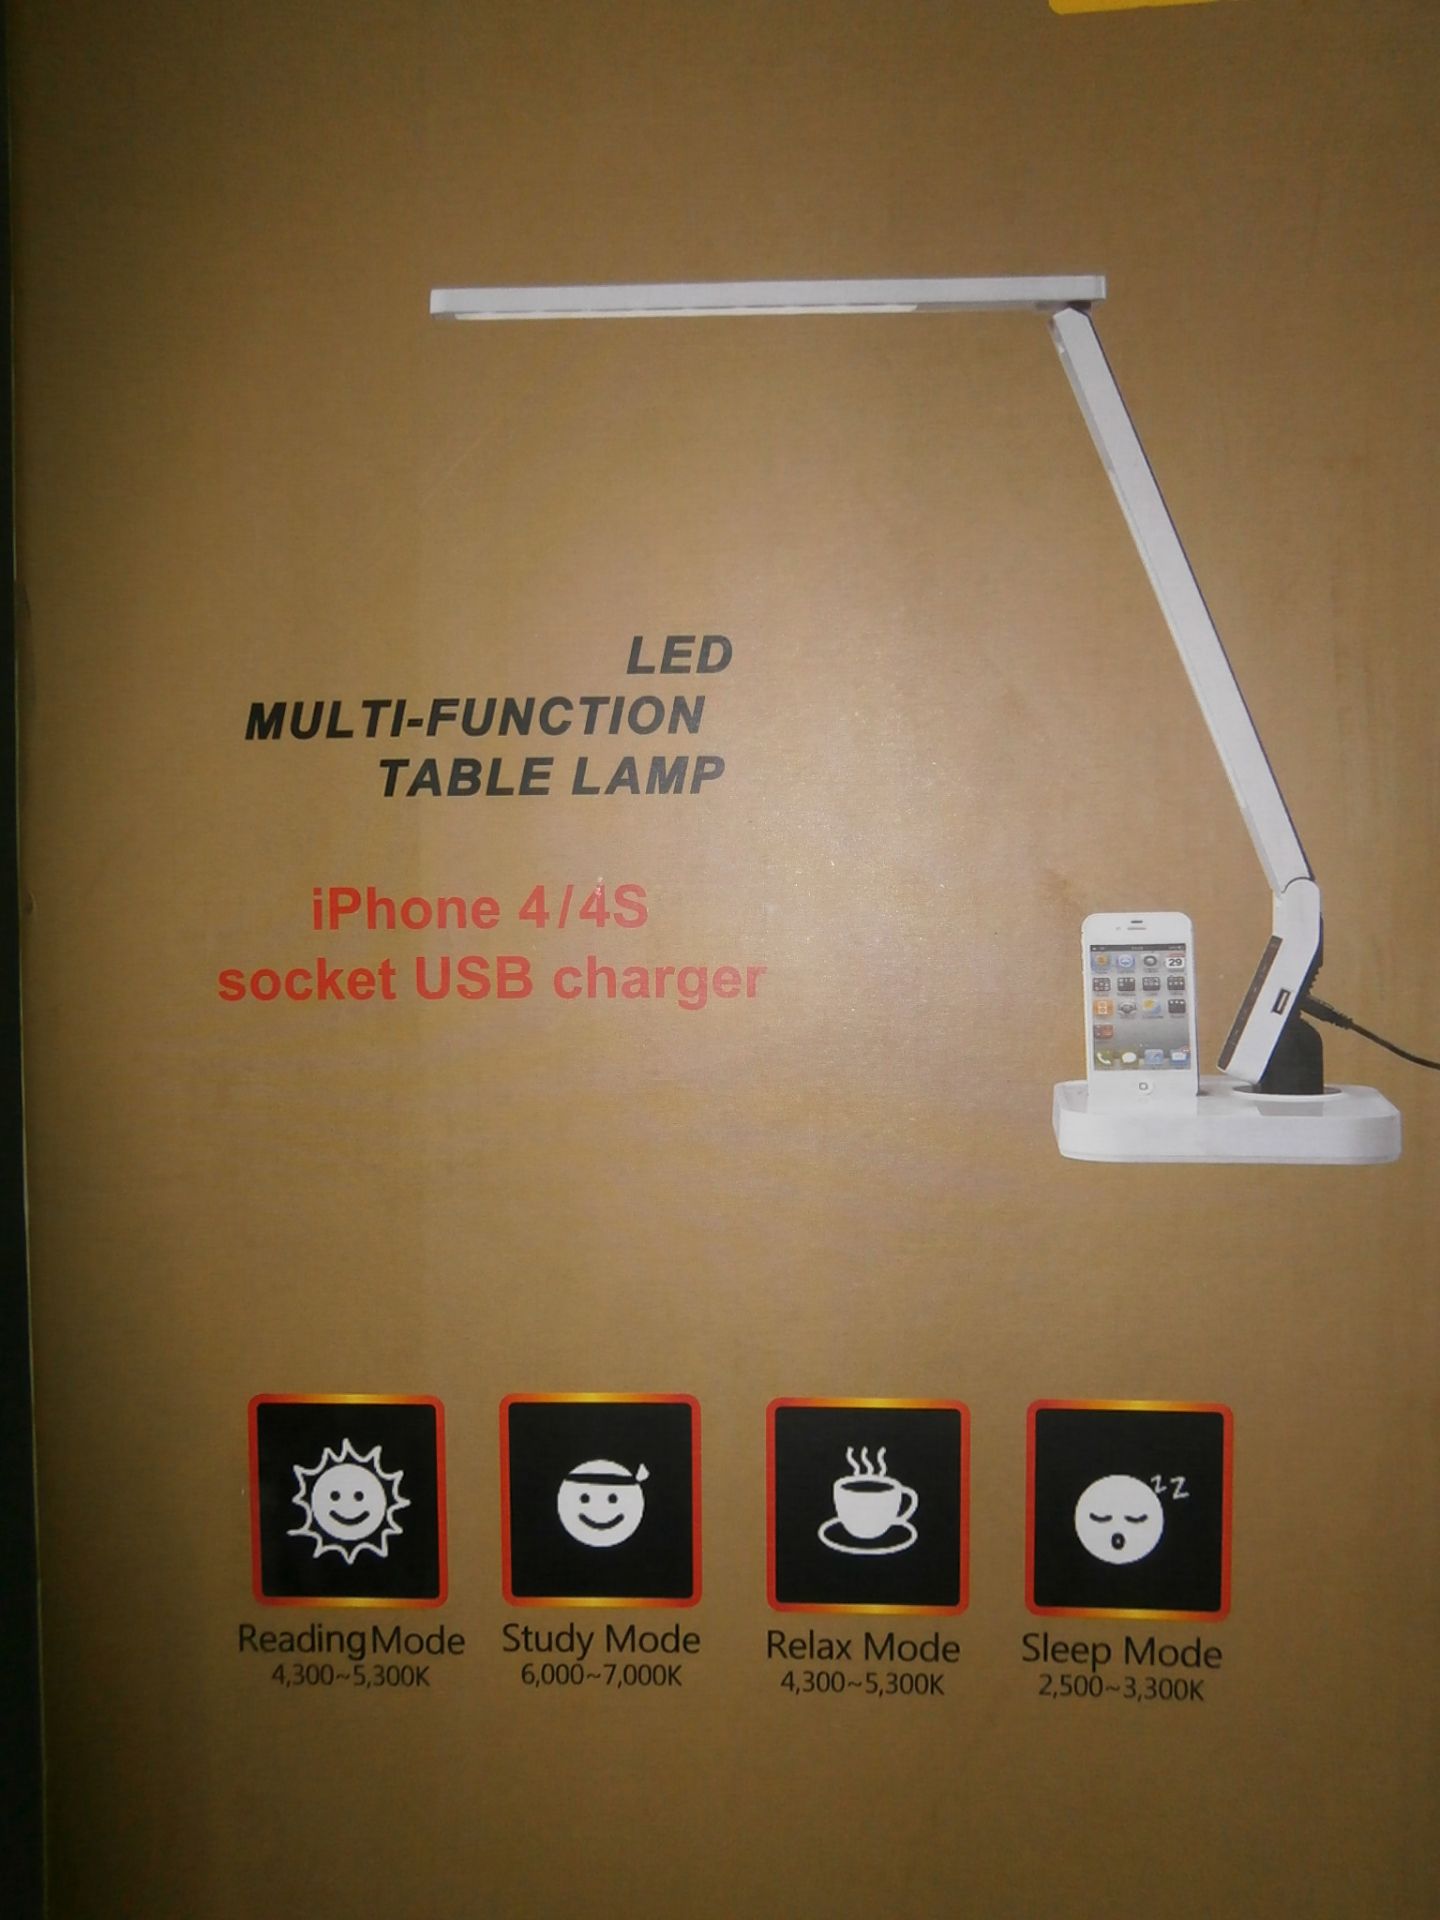 3 x Starlight Series LED Multifunction Table Lamps With iPhone Docking Capabilities - RRP £99.99 - Image 4 of 4